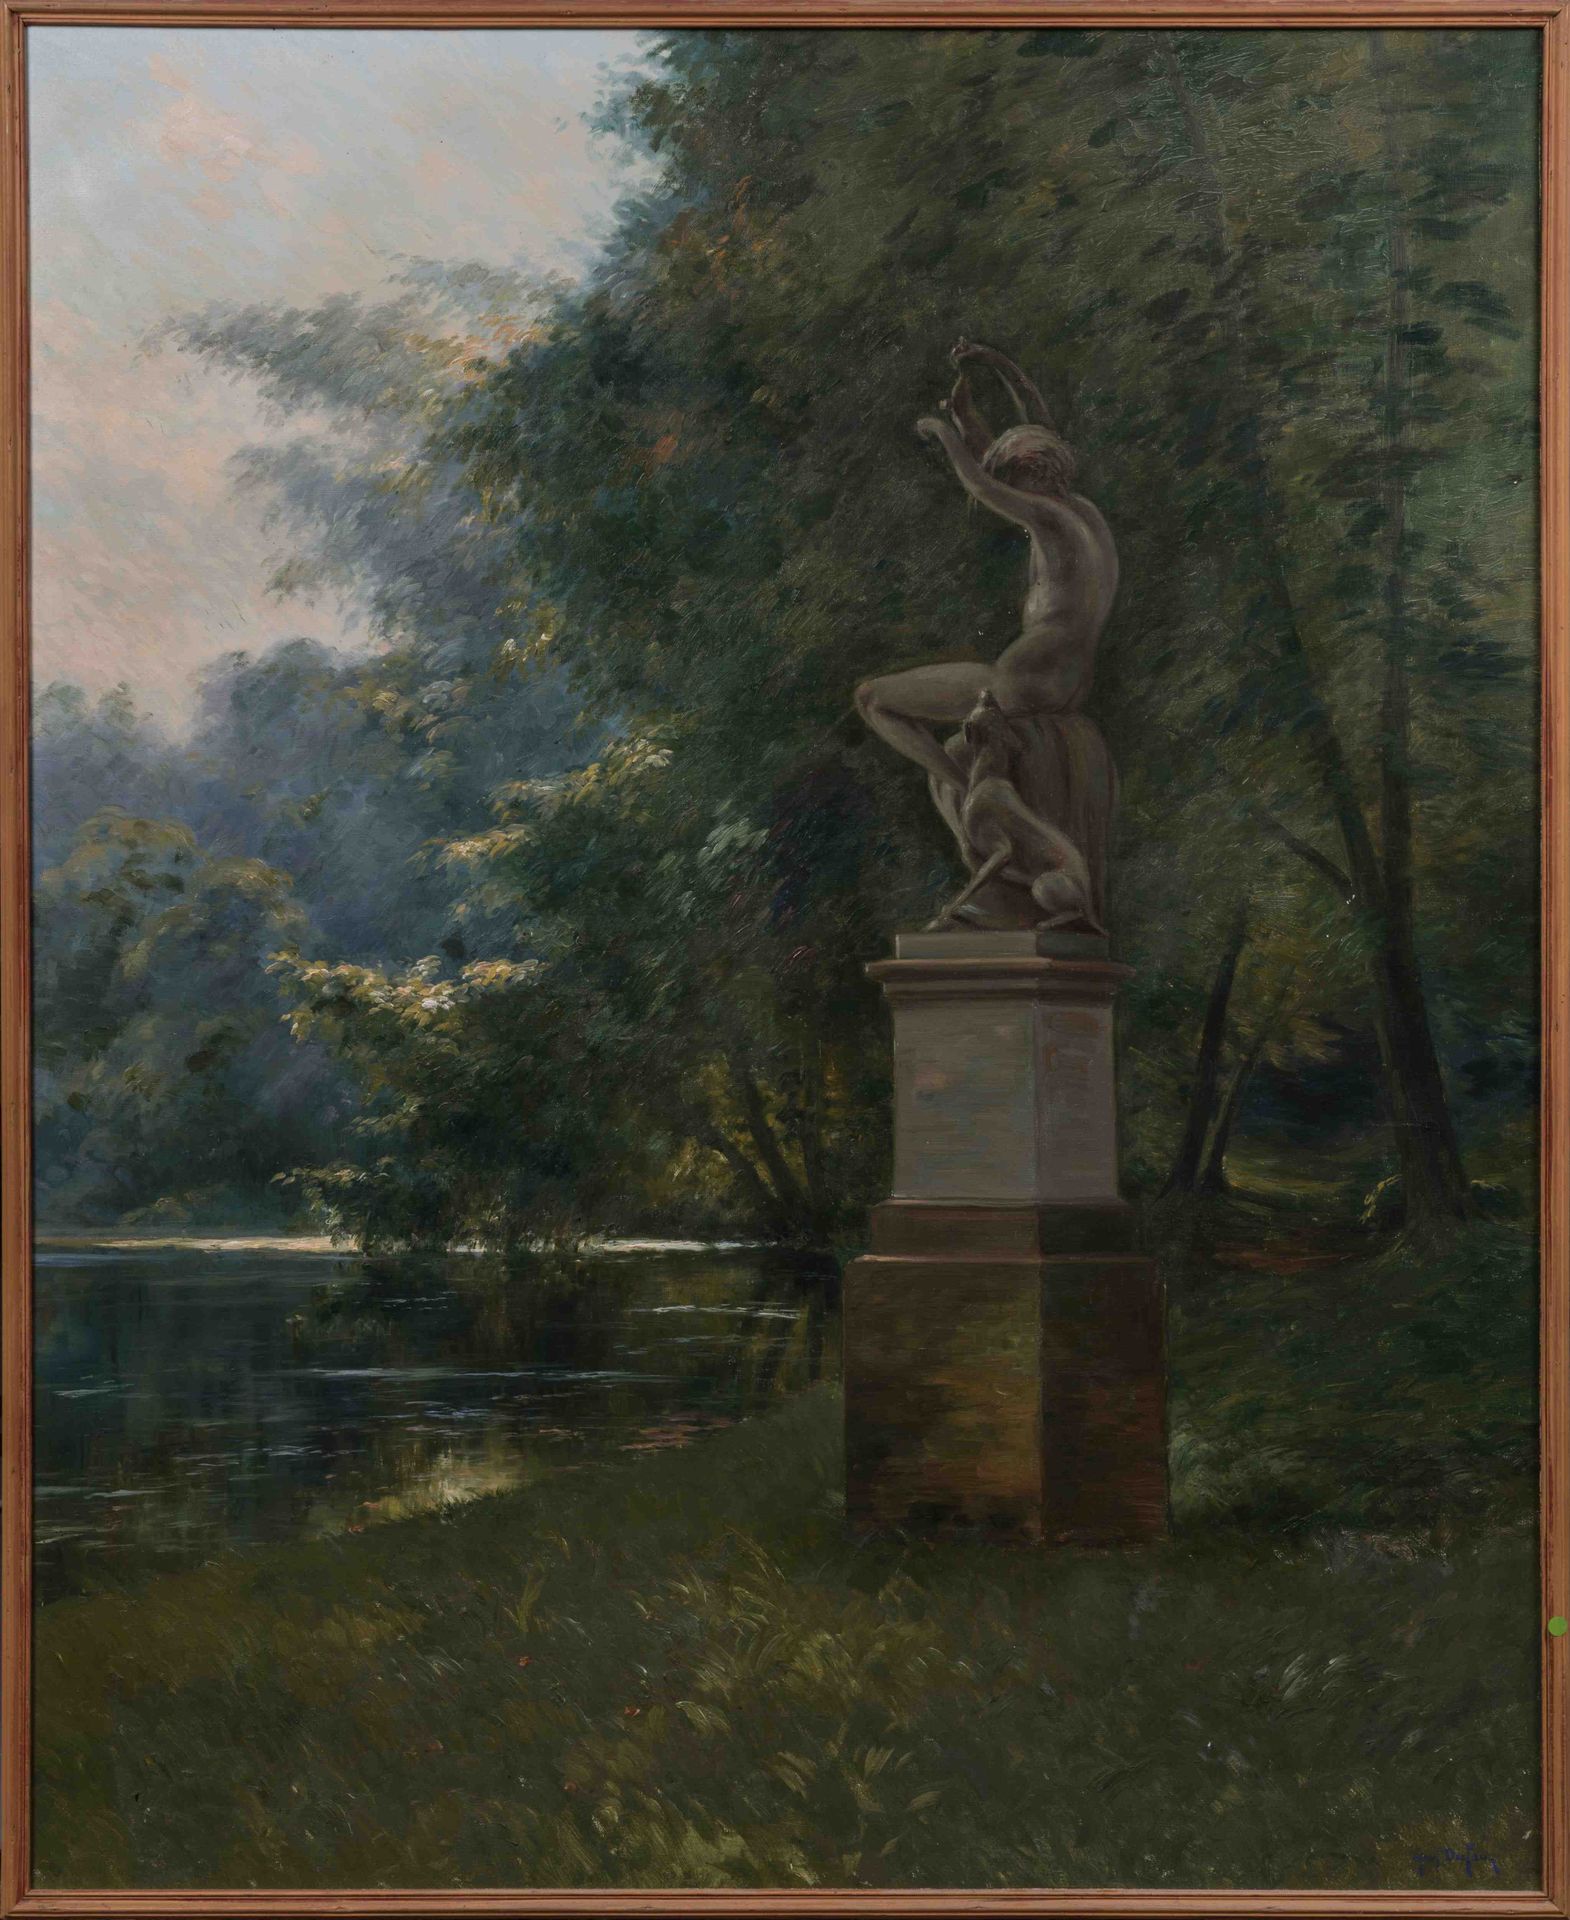 Null Jean DUFAU (19th-20th century)

In the park of the Château de Fontainebleau&hellip;